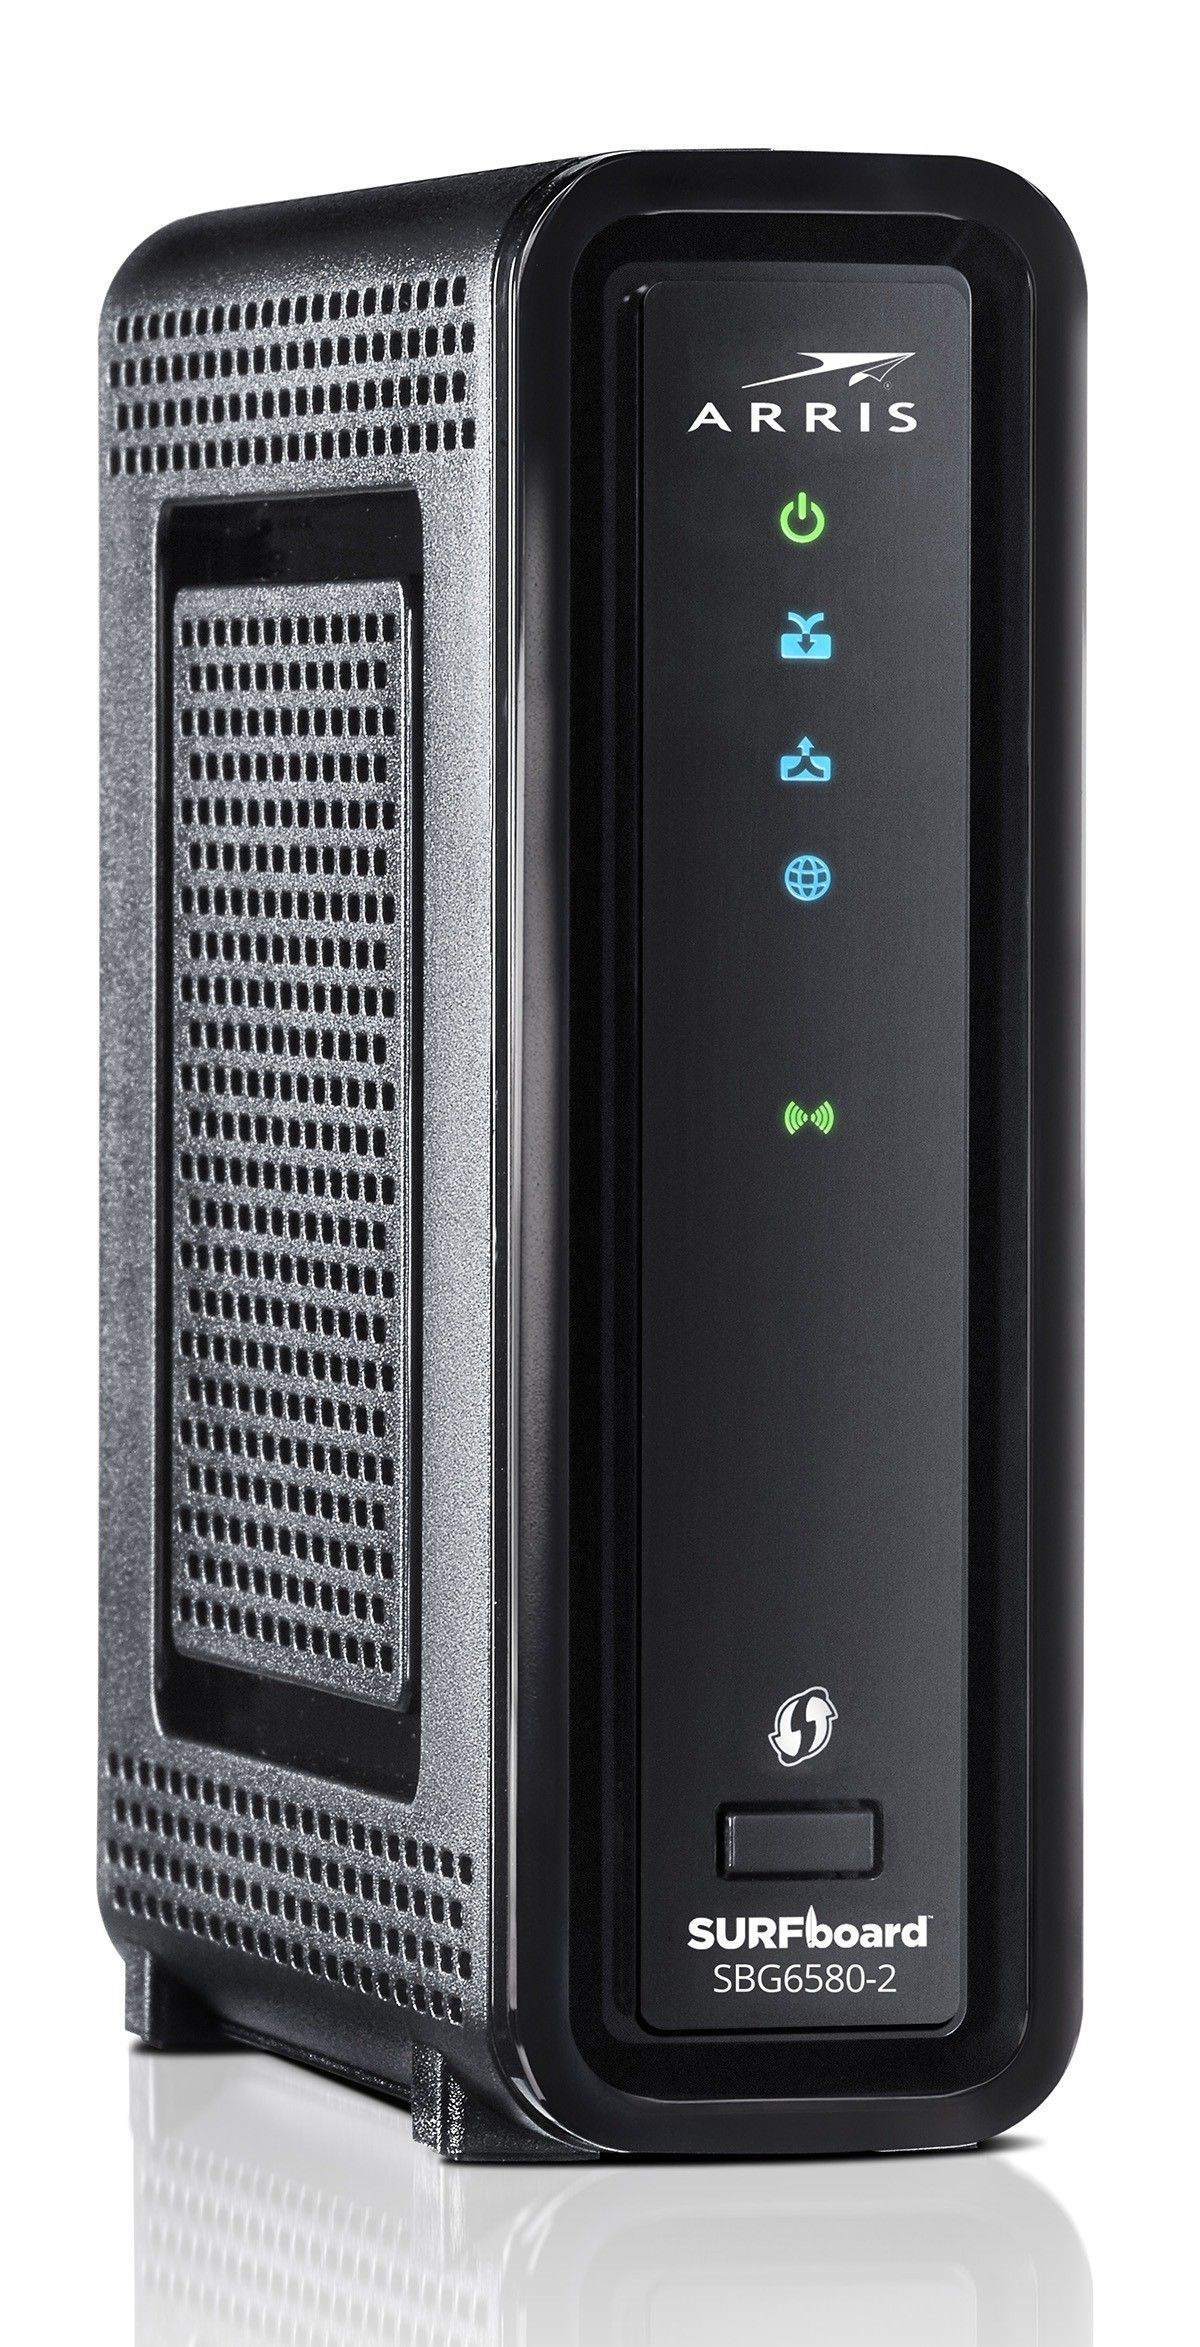 Cable modem router combo Motorola